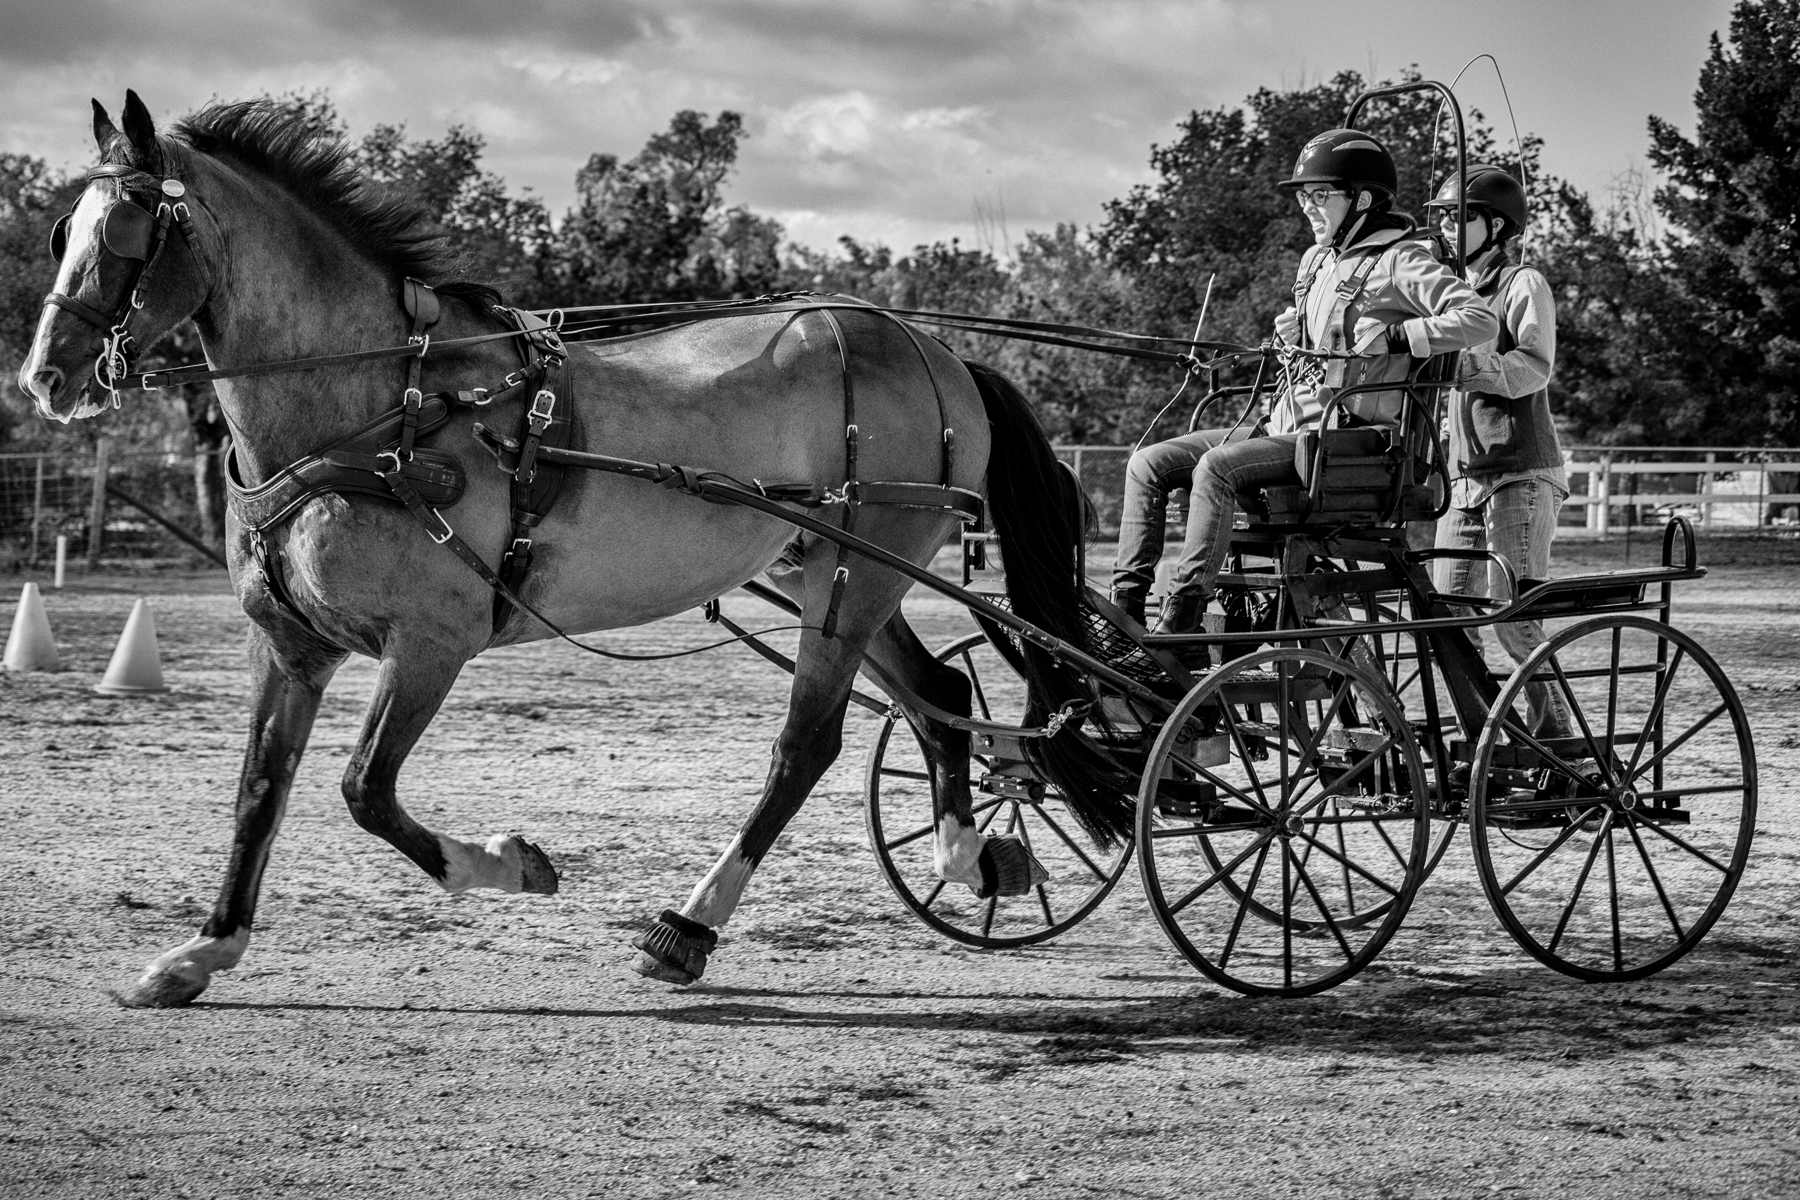 MA-Hold Your Horses-6x4-20160123-IMG_0527-Edit.jpg